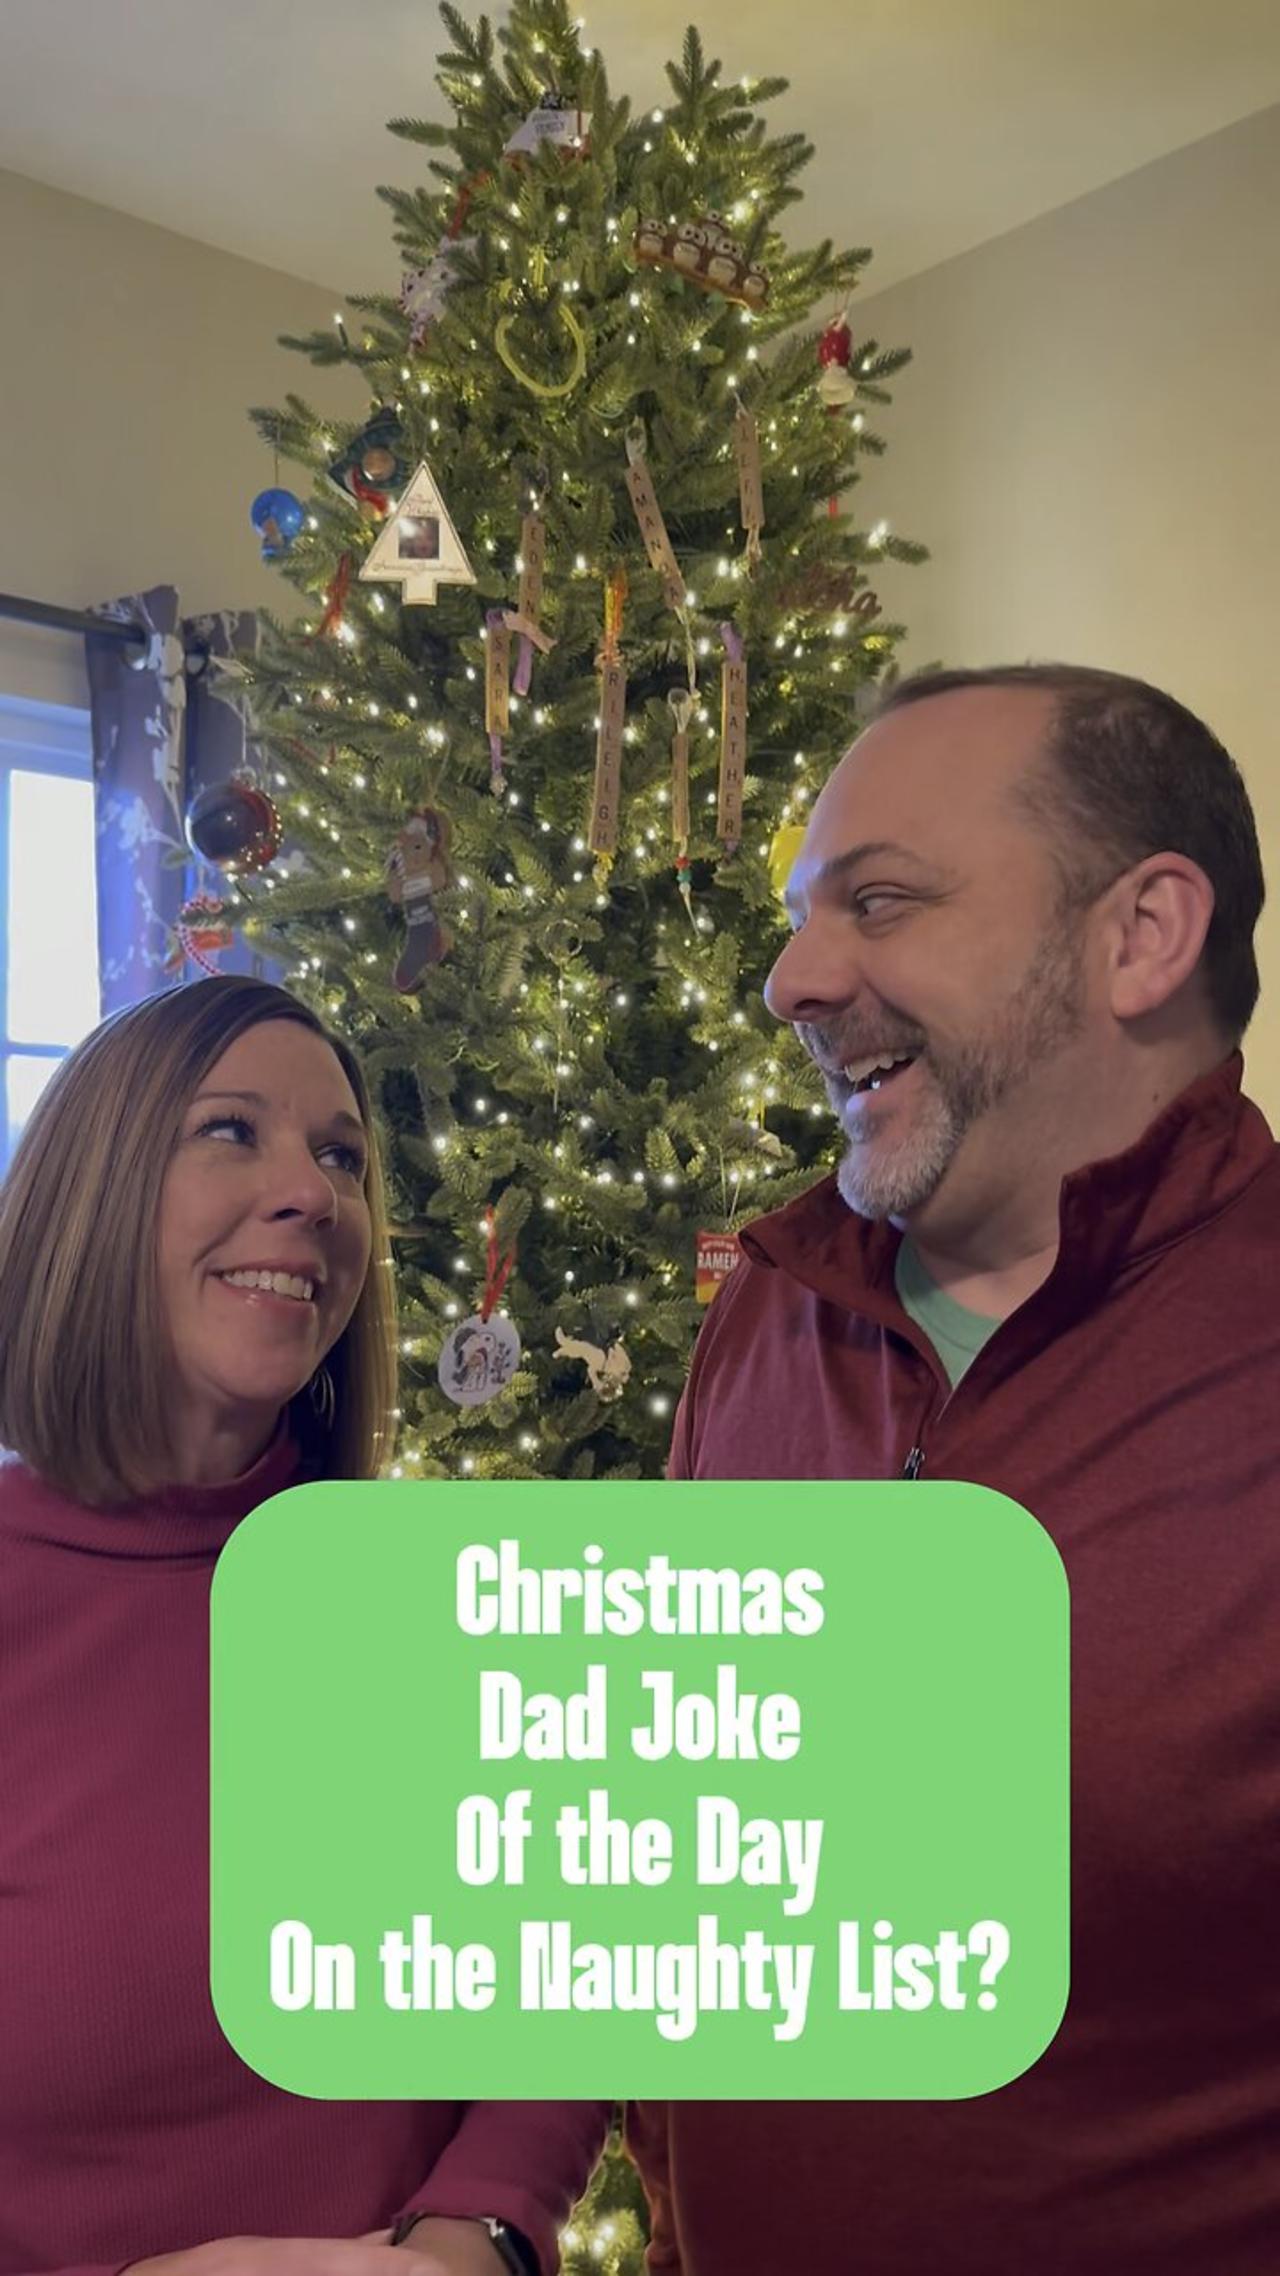 Inappropriate Christmas Joke? Holiday Dad Joke of the Day